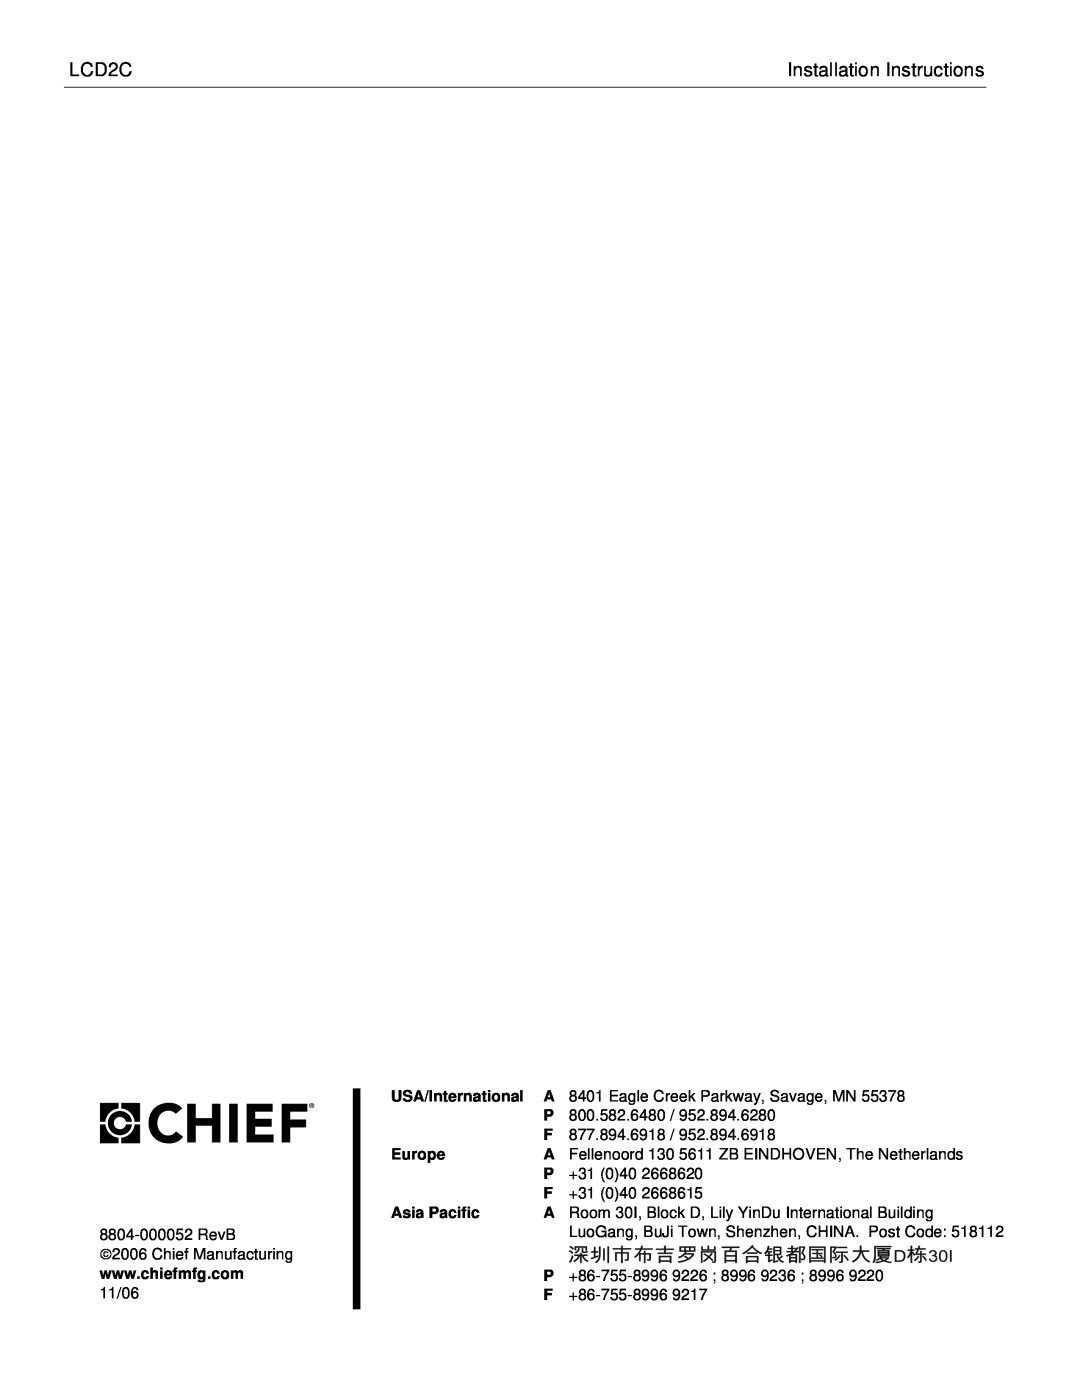 Chief Manufacturing LCD2C installation instructions Installation Instructions, USA/International 